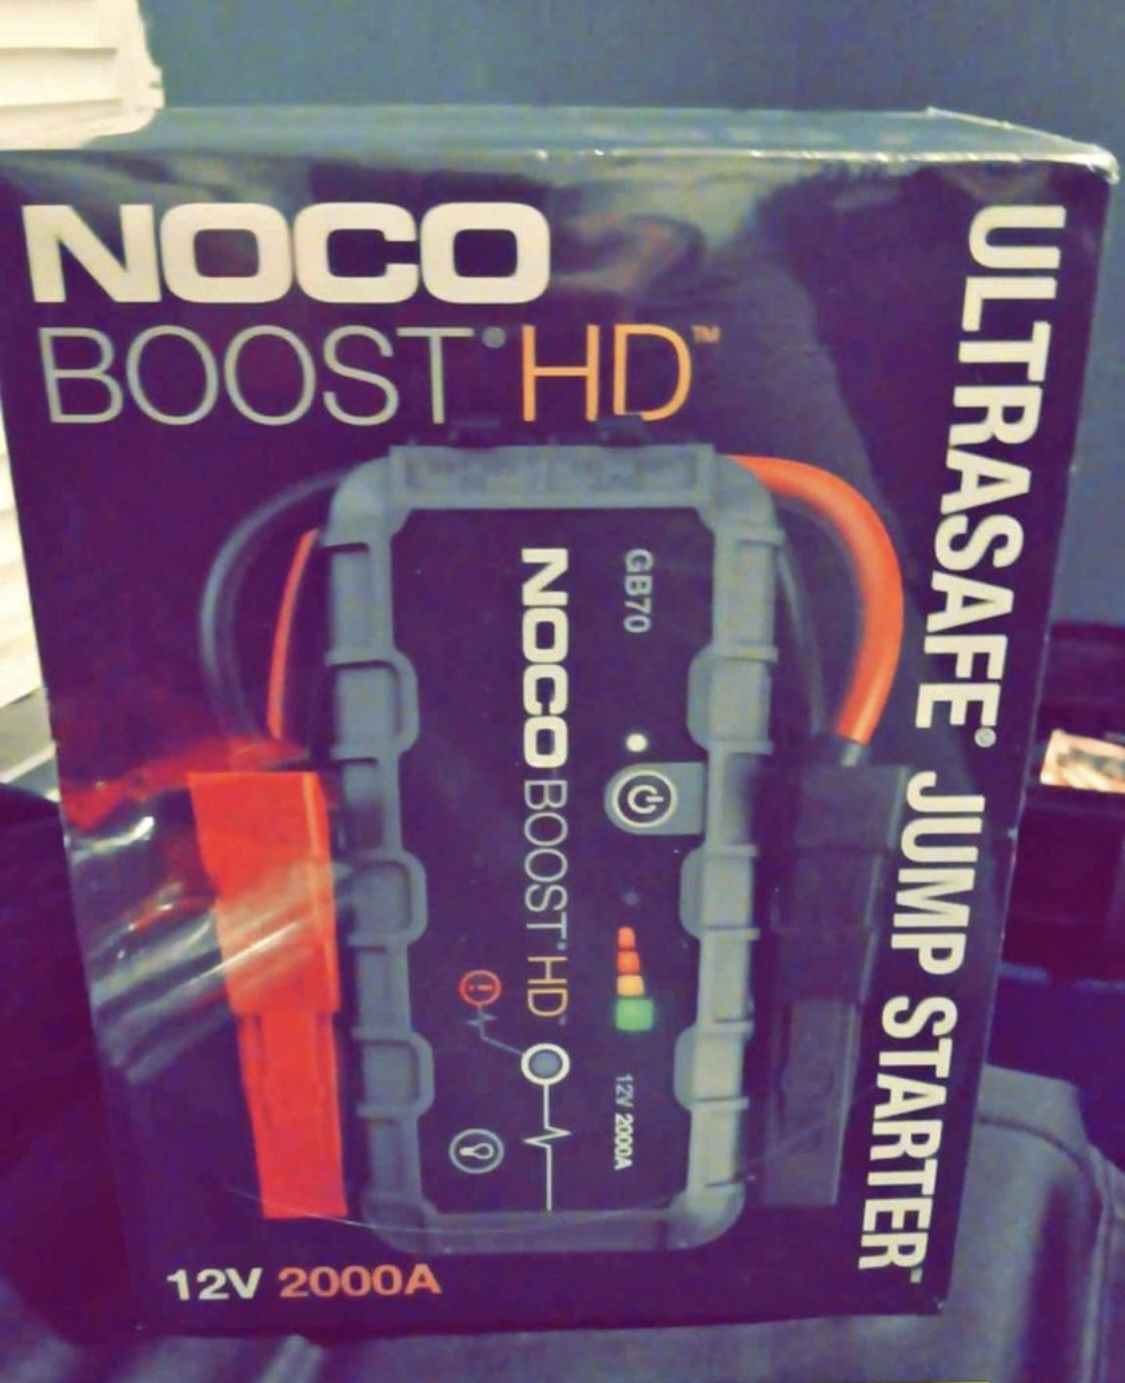 Noco Boost HD GB70 Jump Starter ($160 Firm Price) NEW SEALED